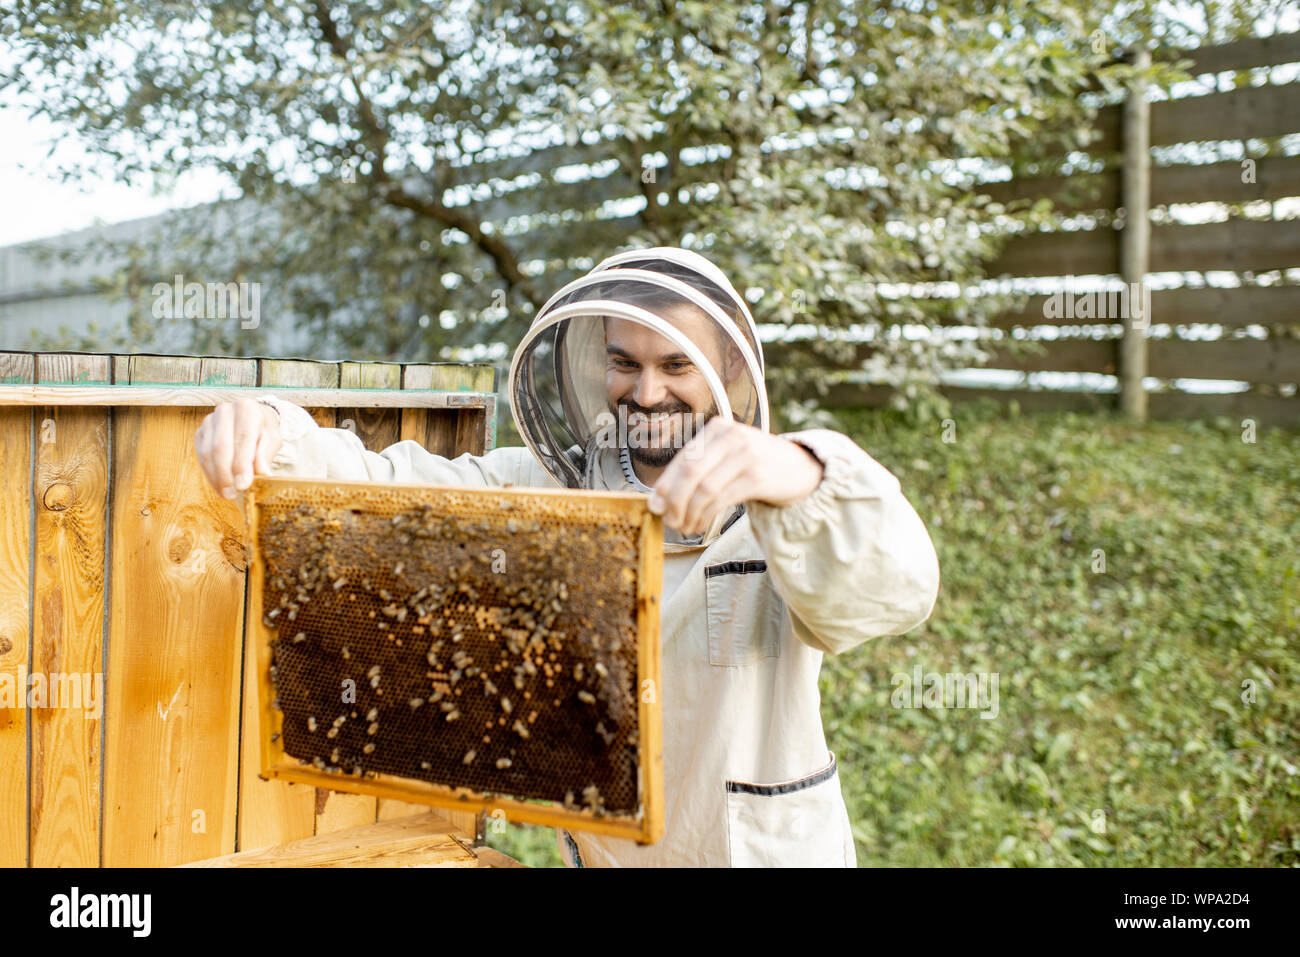 Beekeeper in protective uniform getting honeycombs from the wooden hive, working on the apiary Stock Photo